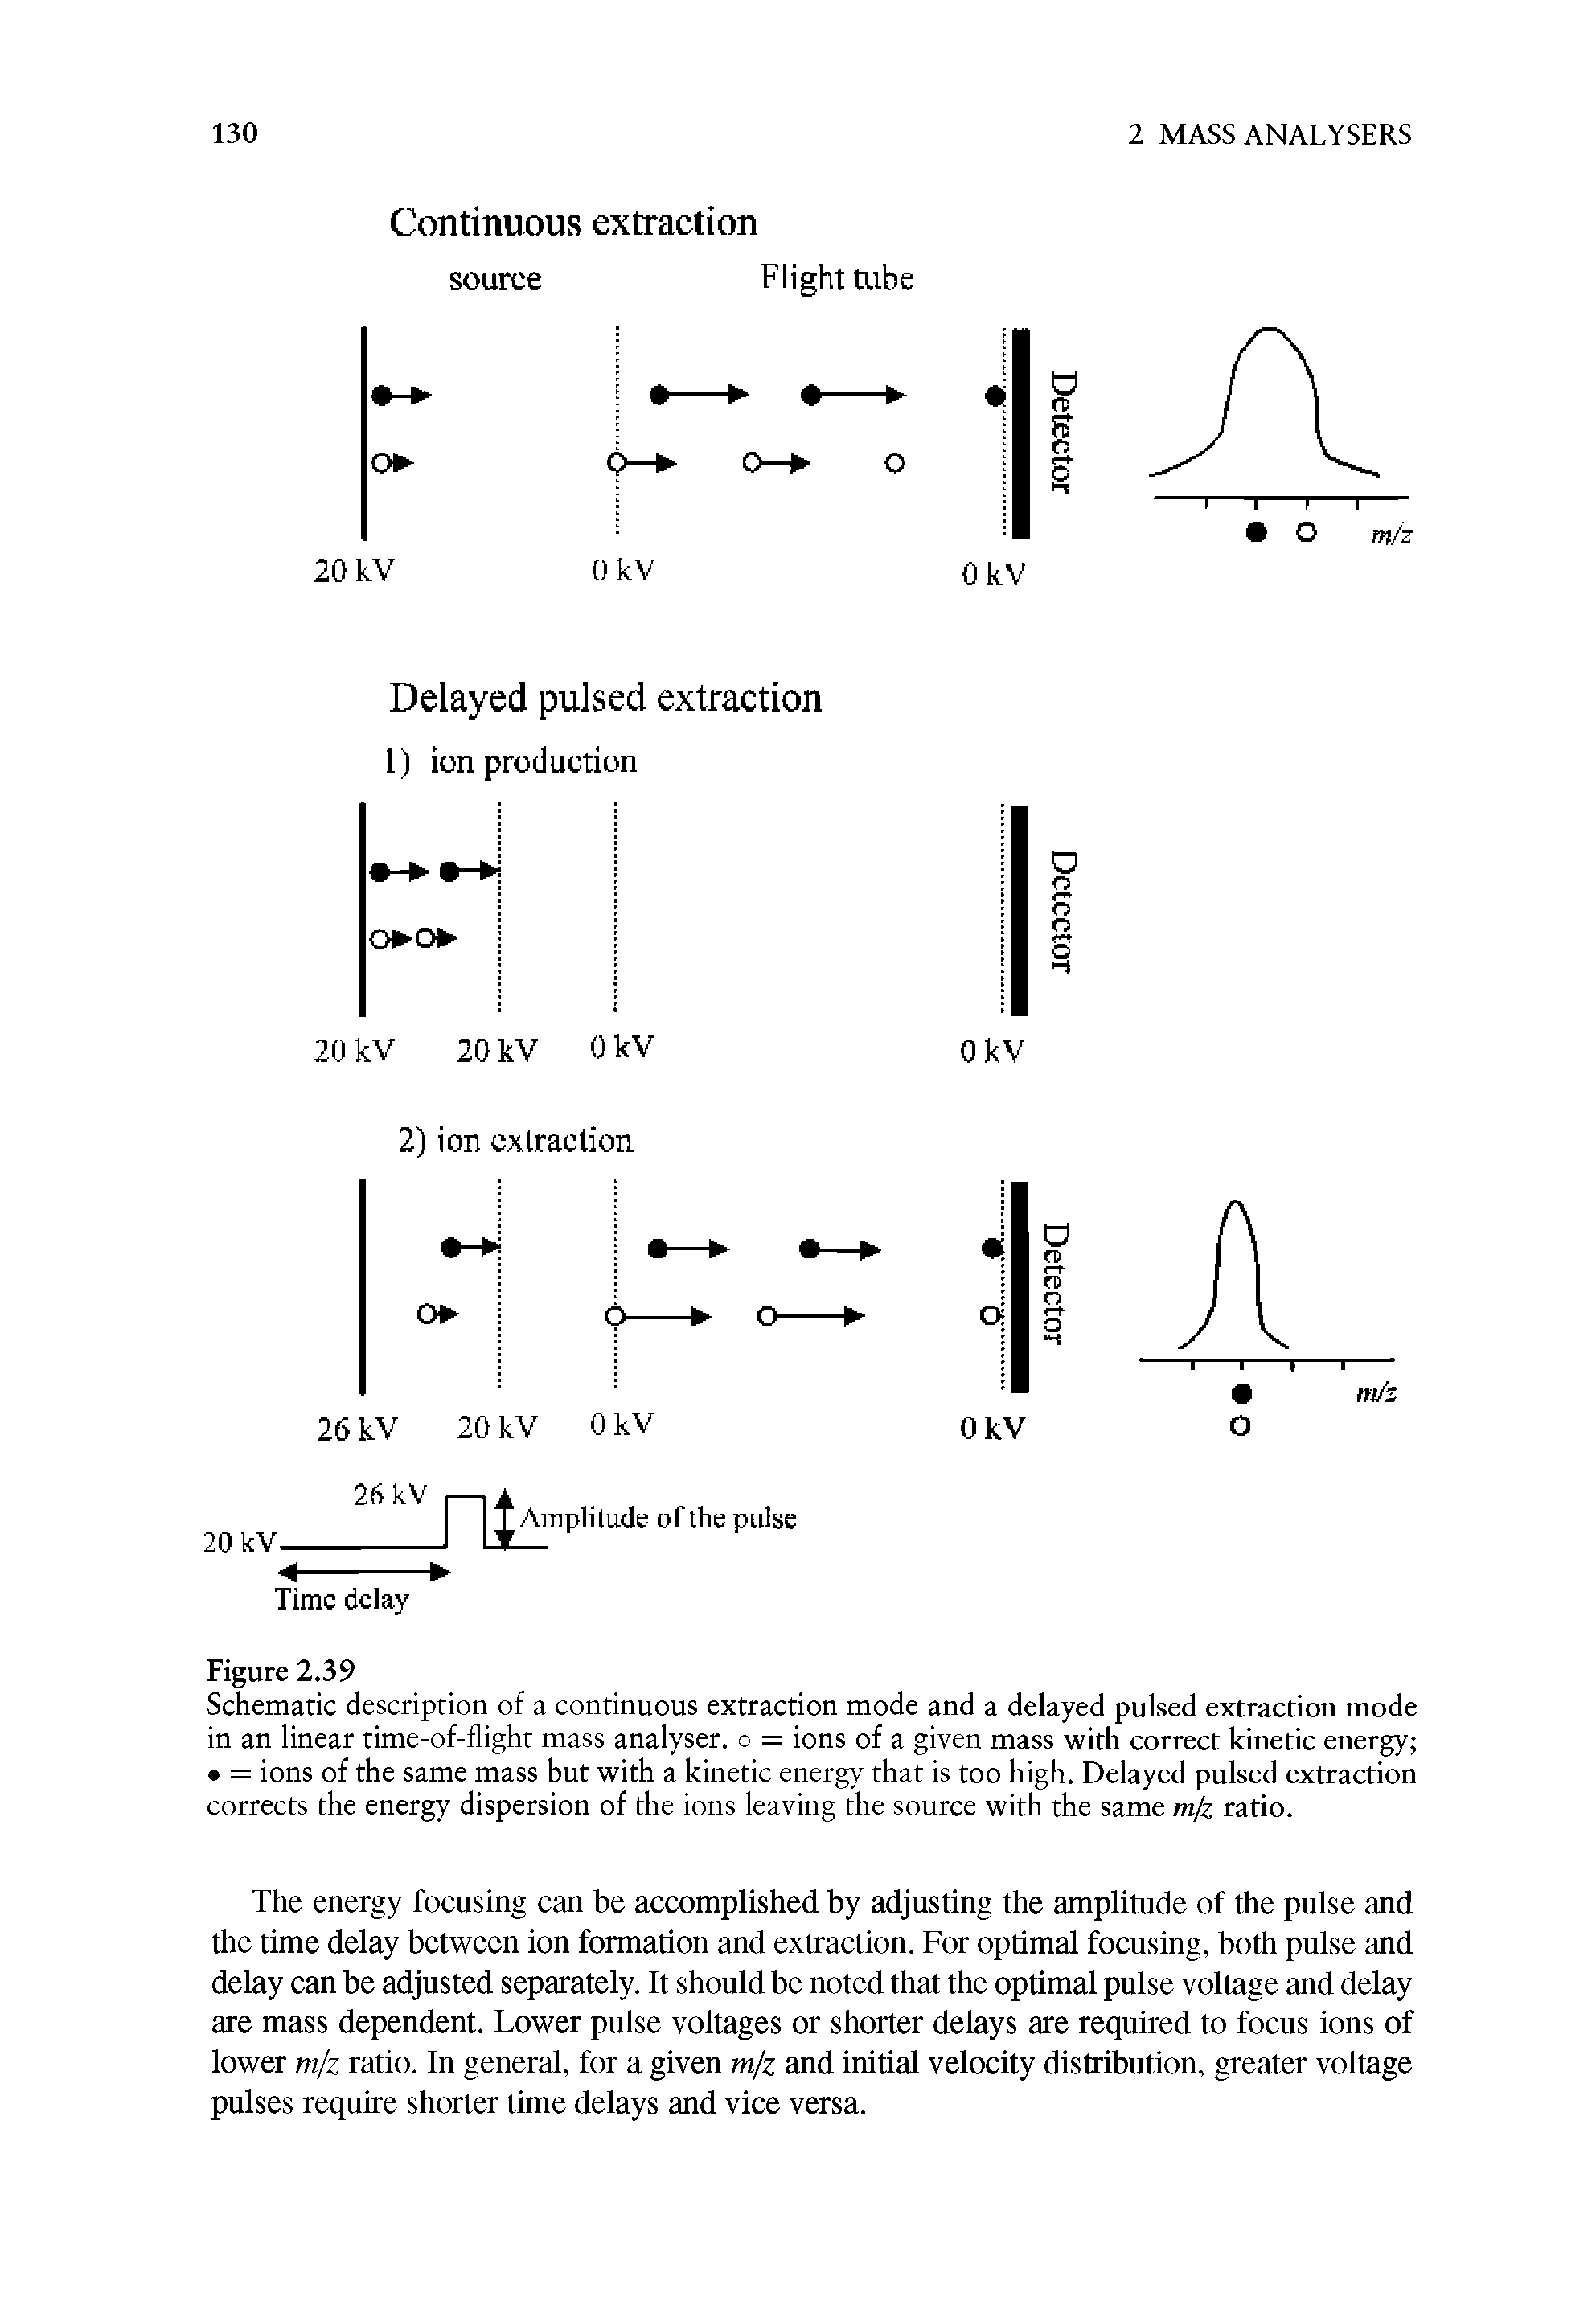 Schematic description of a continuous extraction mode and a delayed pulsed extraction mode in an linear time-of-flight mass analyser, o = ions of a given mass with correct kinetic energy = ions of the same mass but with a kinetic energy that is too high. Delayed pulsed extraction corrects the energy dispersion of the ions leaving the source with the same mjz ratio.